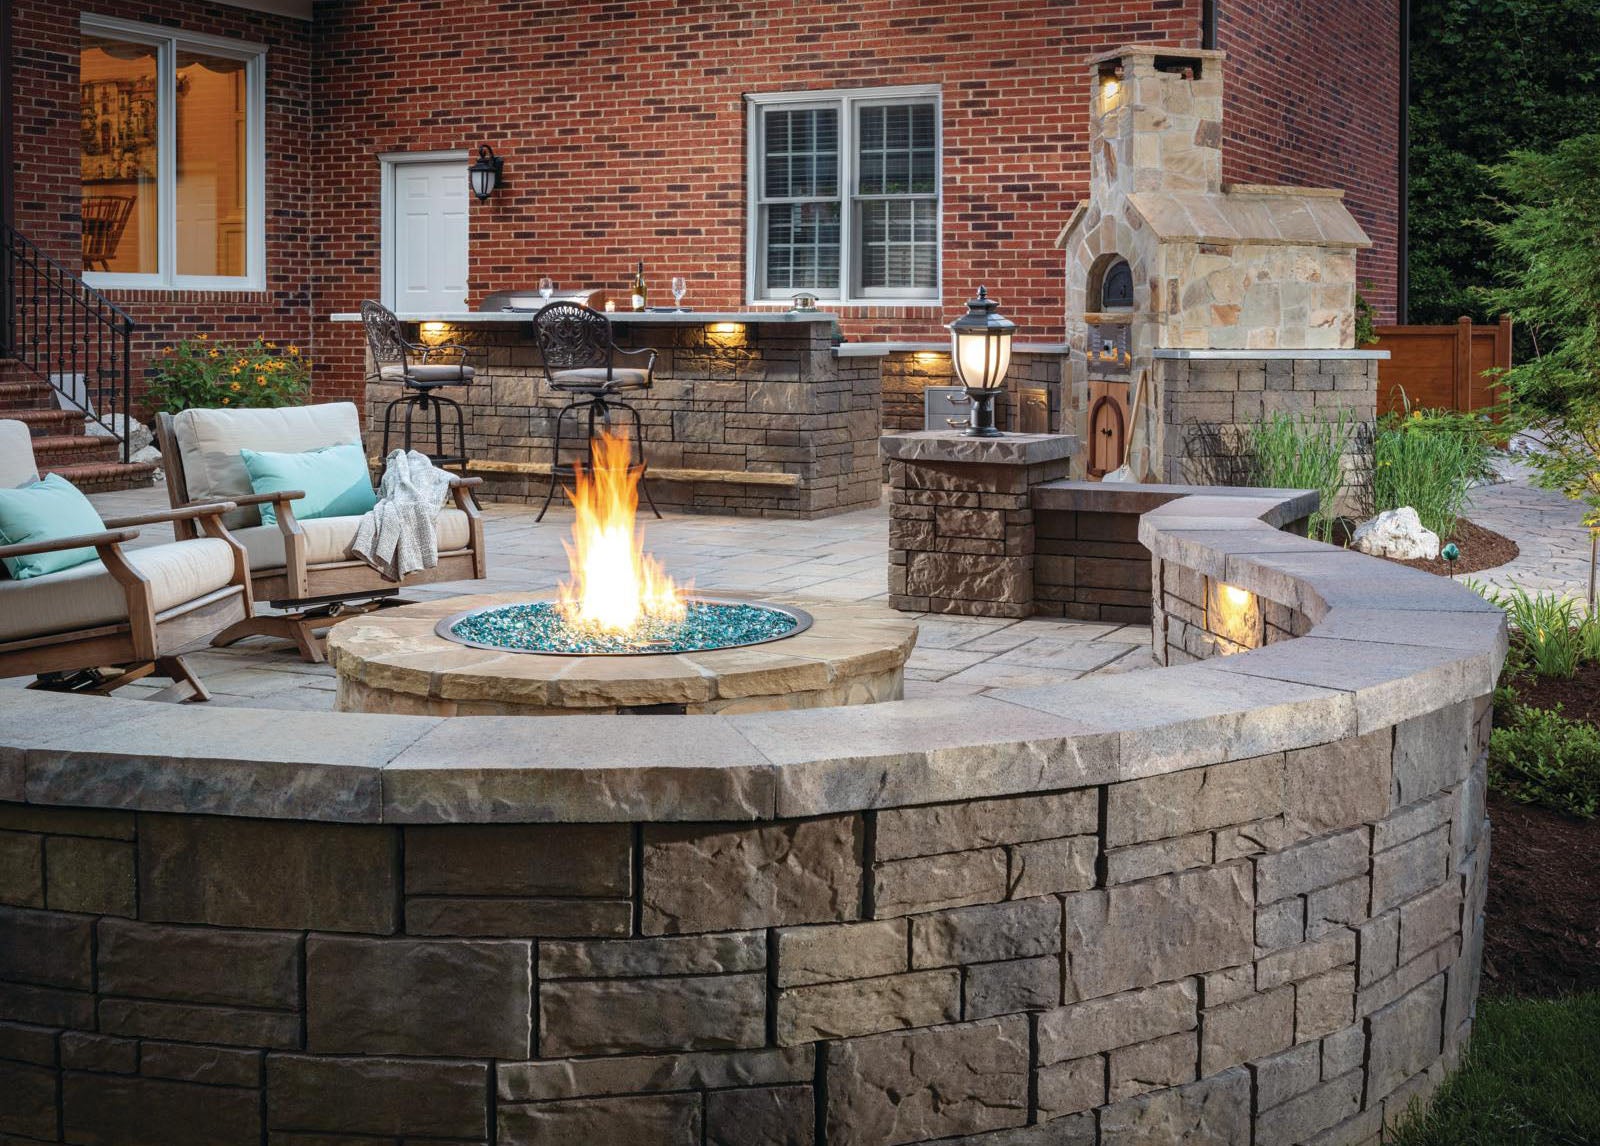 Designing A Patio Around Fire Pit, Pavers Around Fire Pit